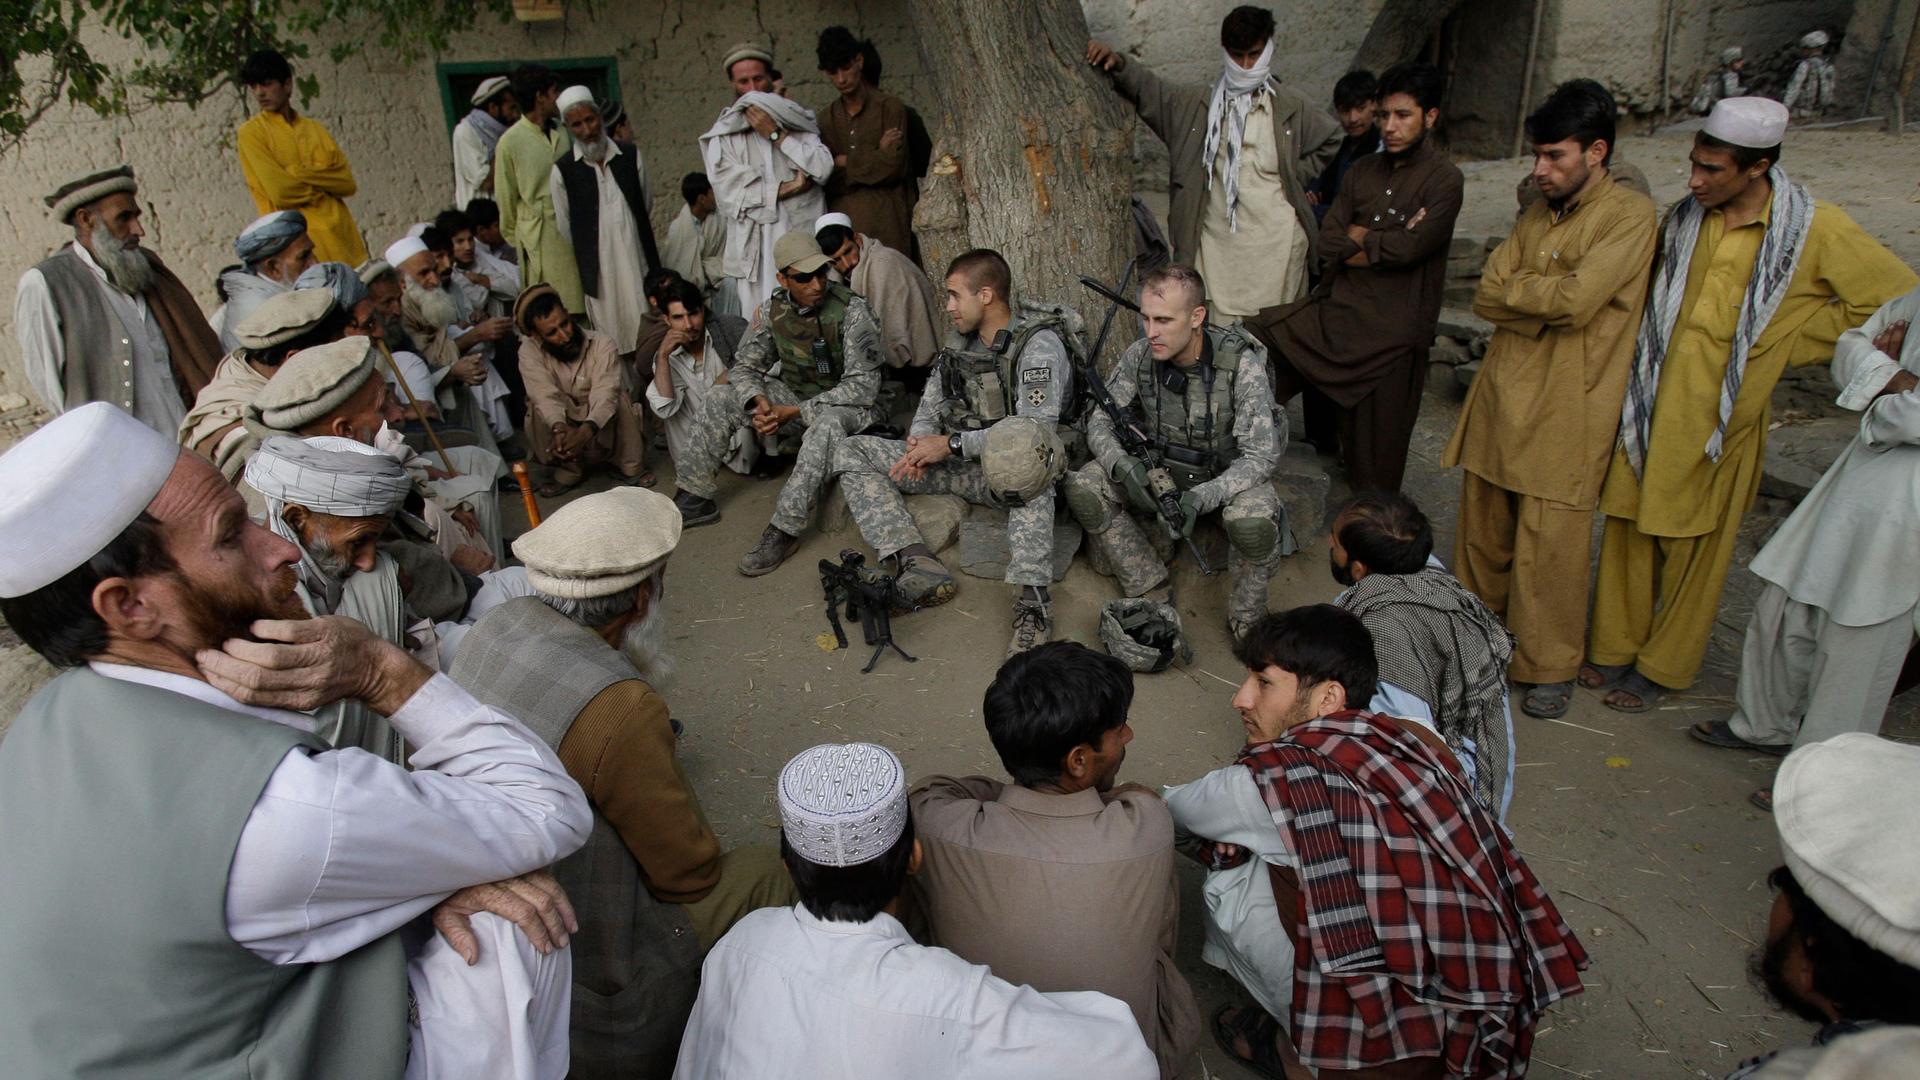 Lt. Thomas Goodman meets with villagers in Qatar Kala in the Pech Valley of Afghanistan's Kunar province with his interpreter Ayazudin Hilal.